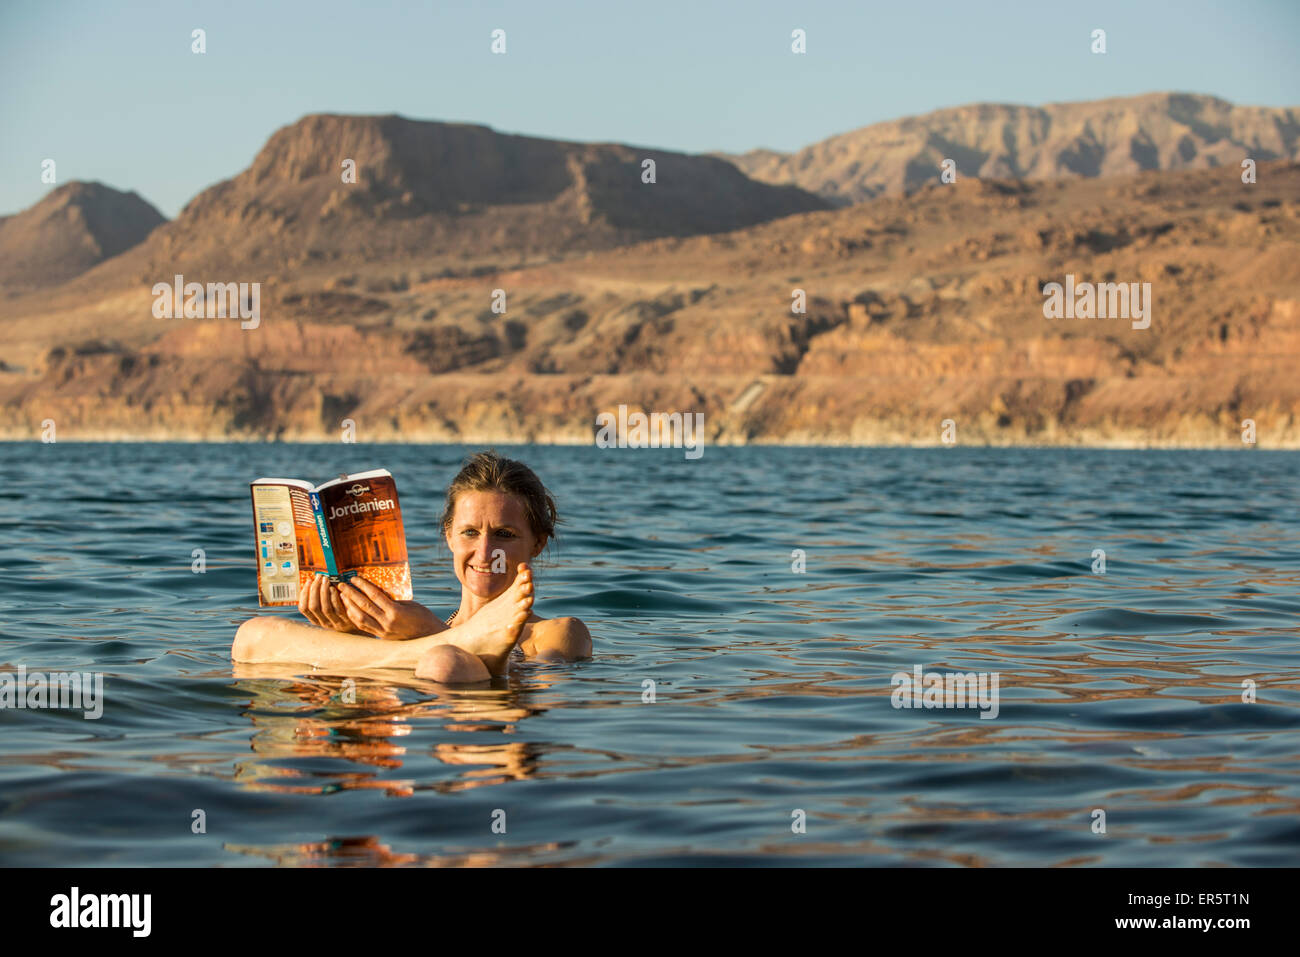 Woman reading a guidebook in Dead Sea, Jordan, Middle East Stock Photo